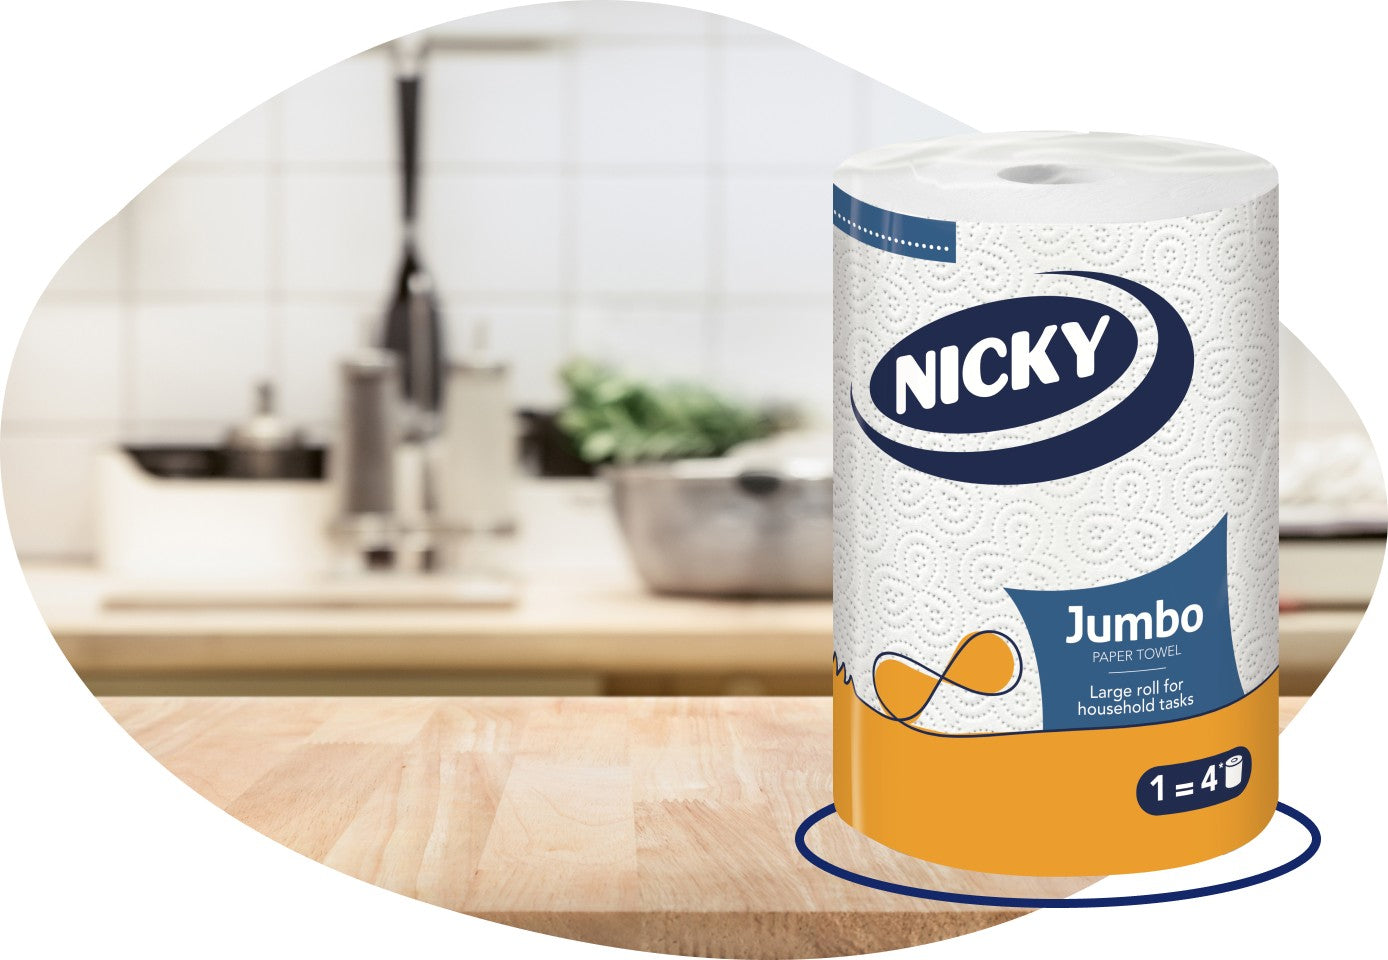 Nicky Jumbo Kitchen Towels 12 Pack